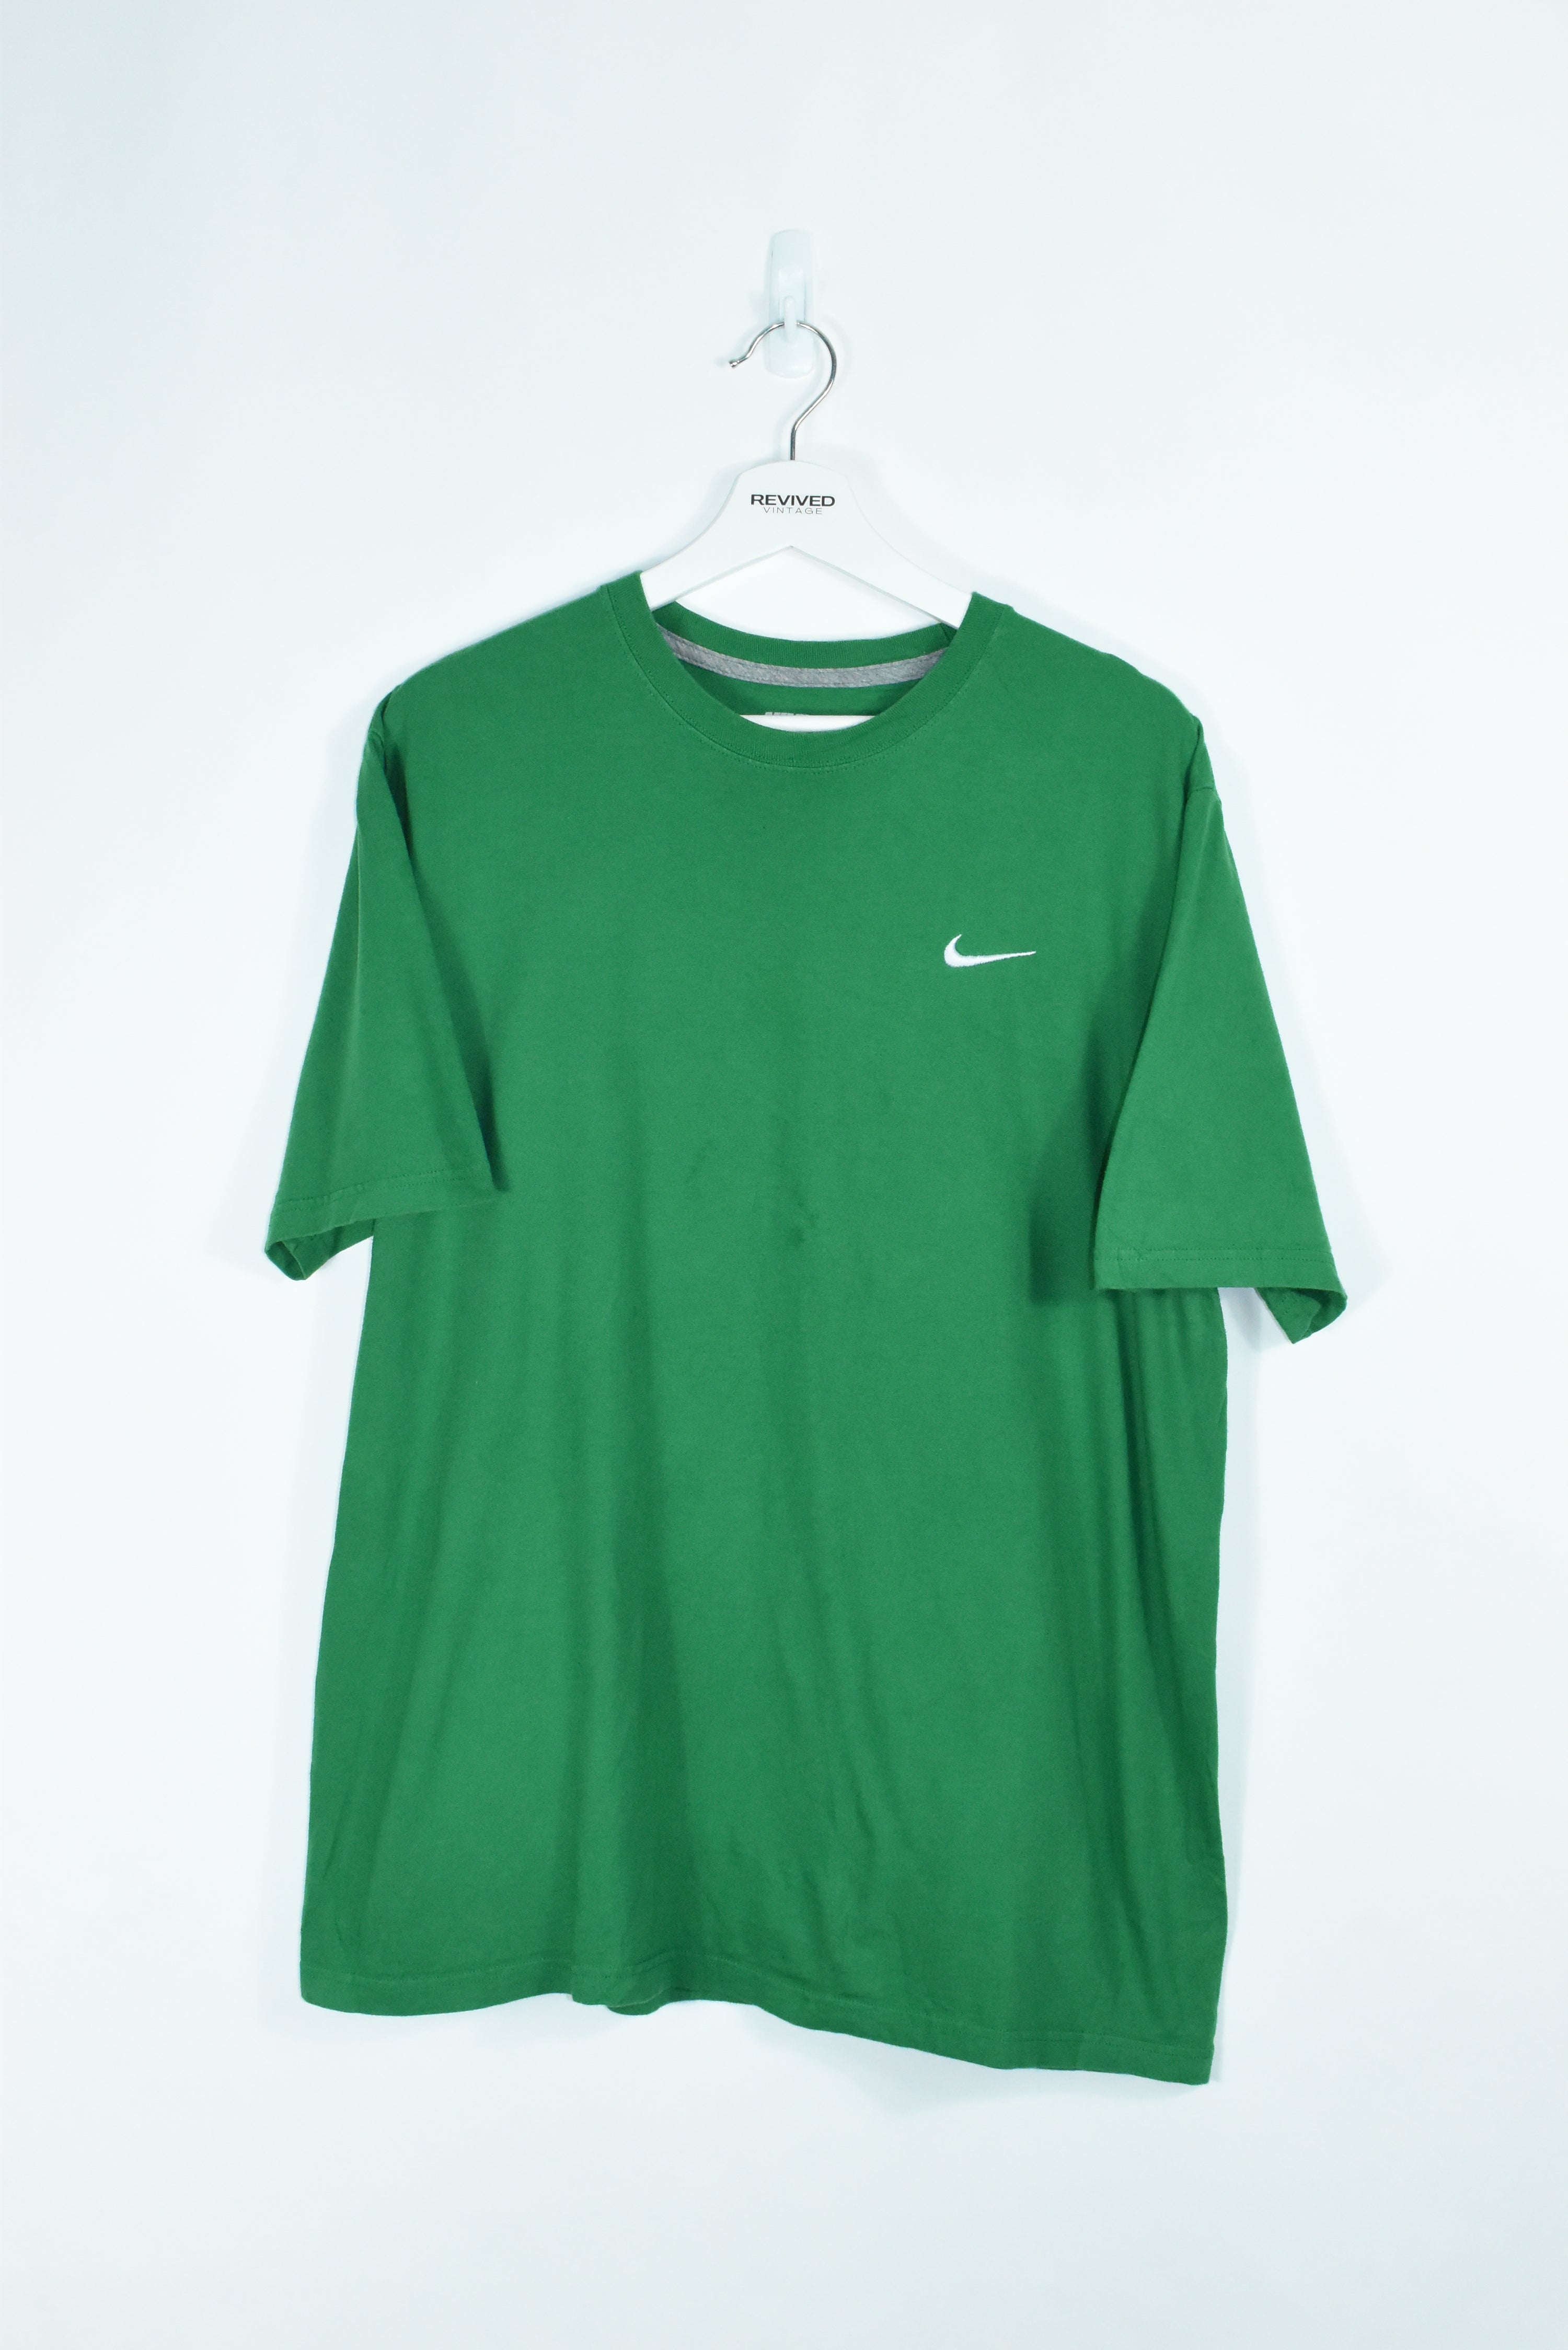 Vintage Nike Green Embroidery Small Swoosh T Shirt XLARGE